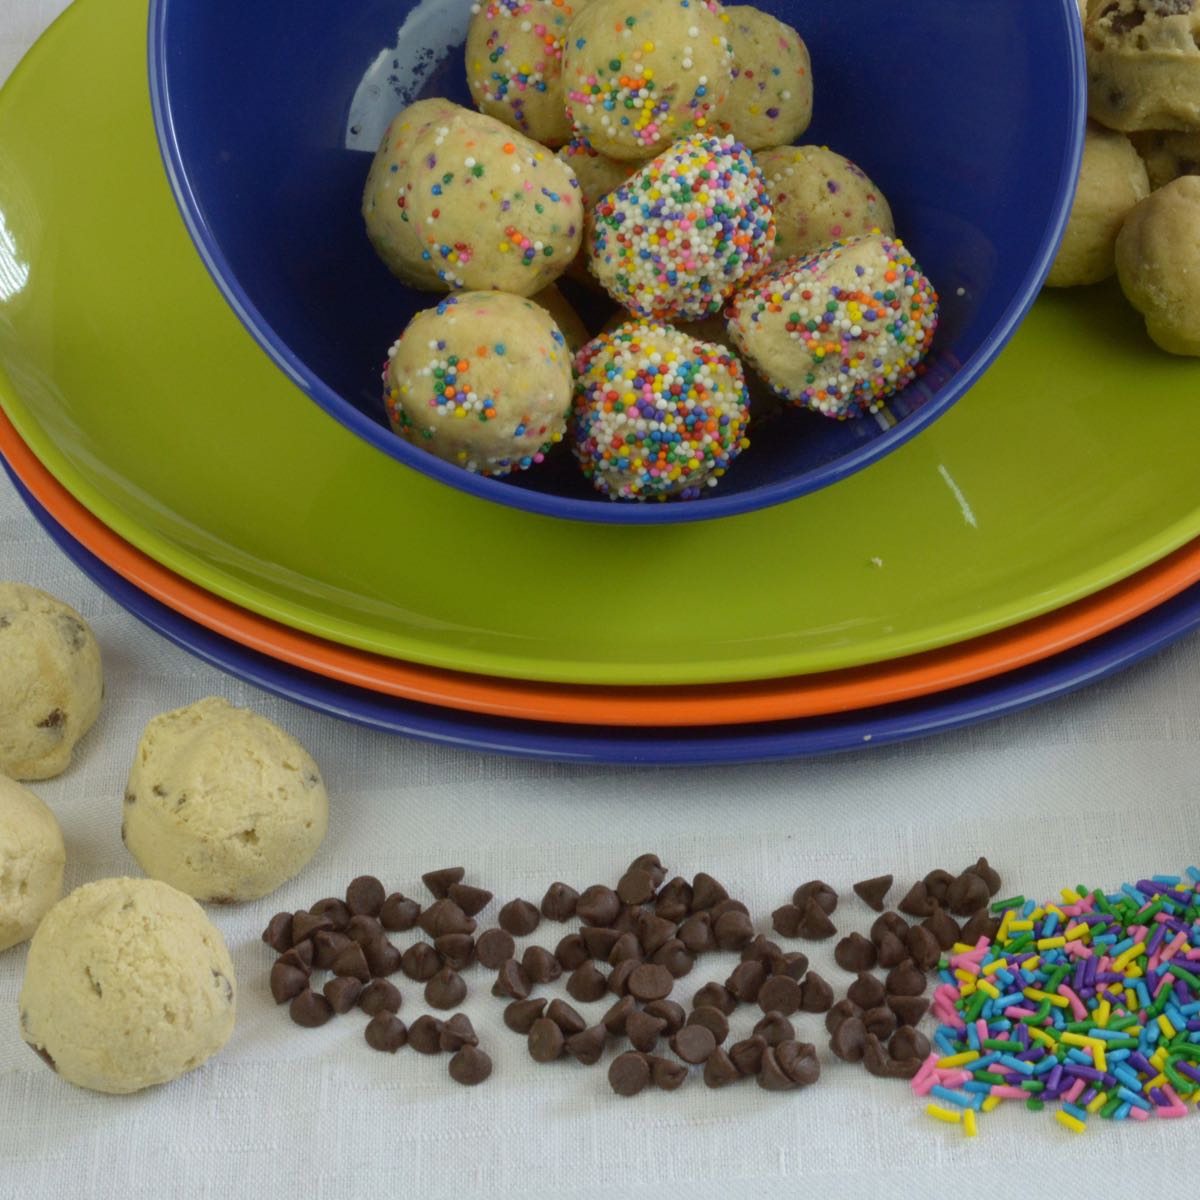 Gluten free Edible Cookie Dough Balls covered in rainbow sprinkles are fun for kids and can be made dairy free.